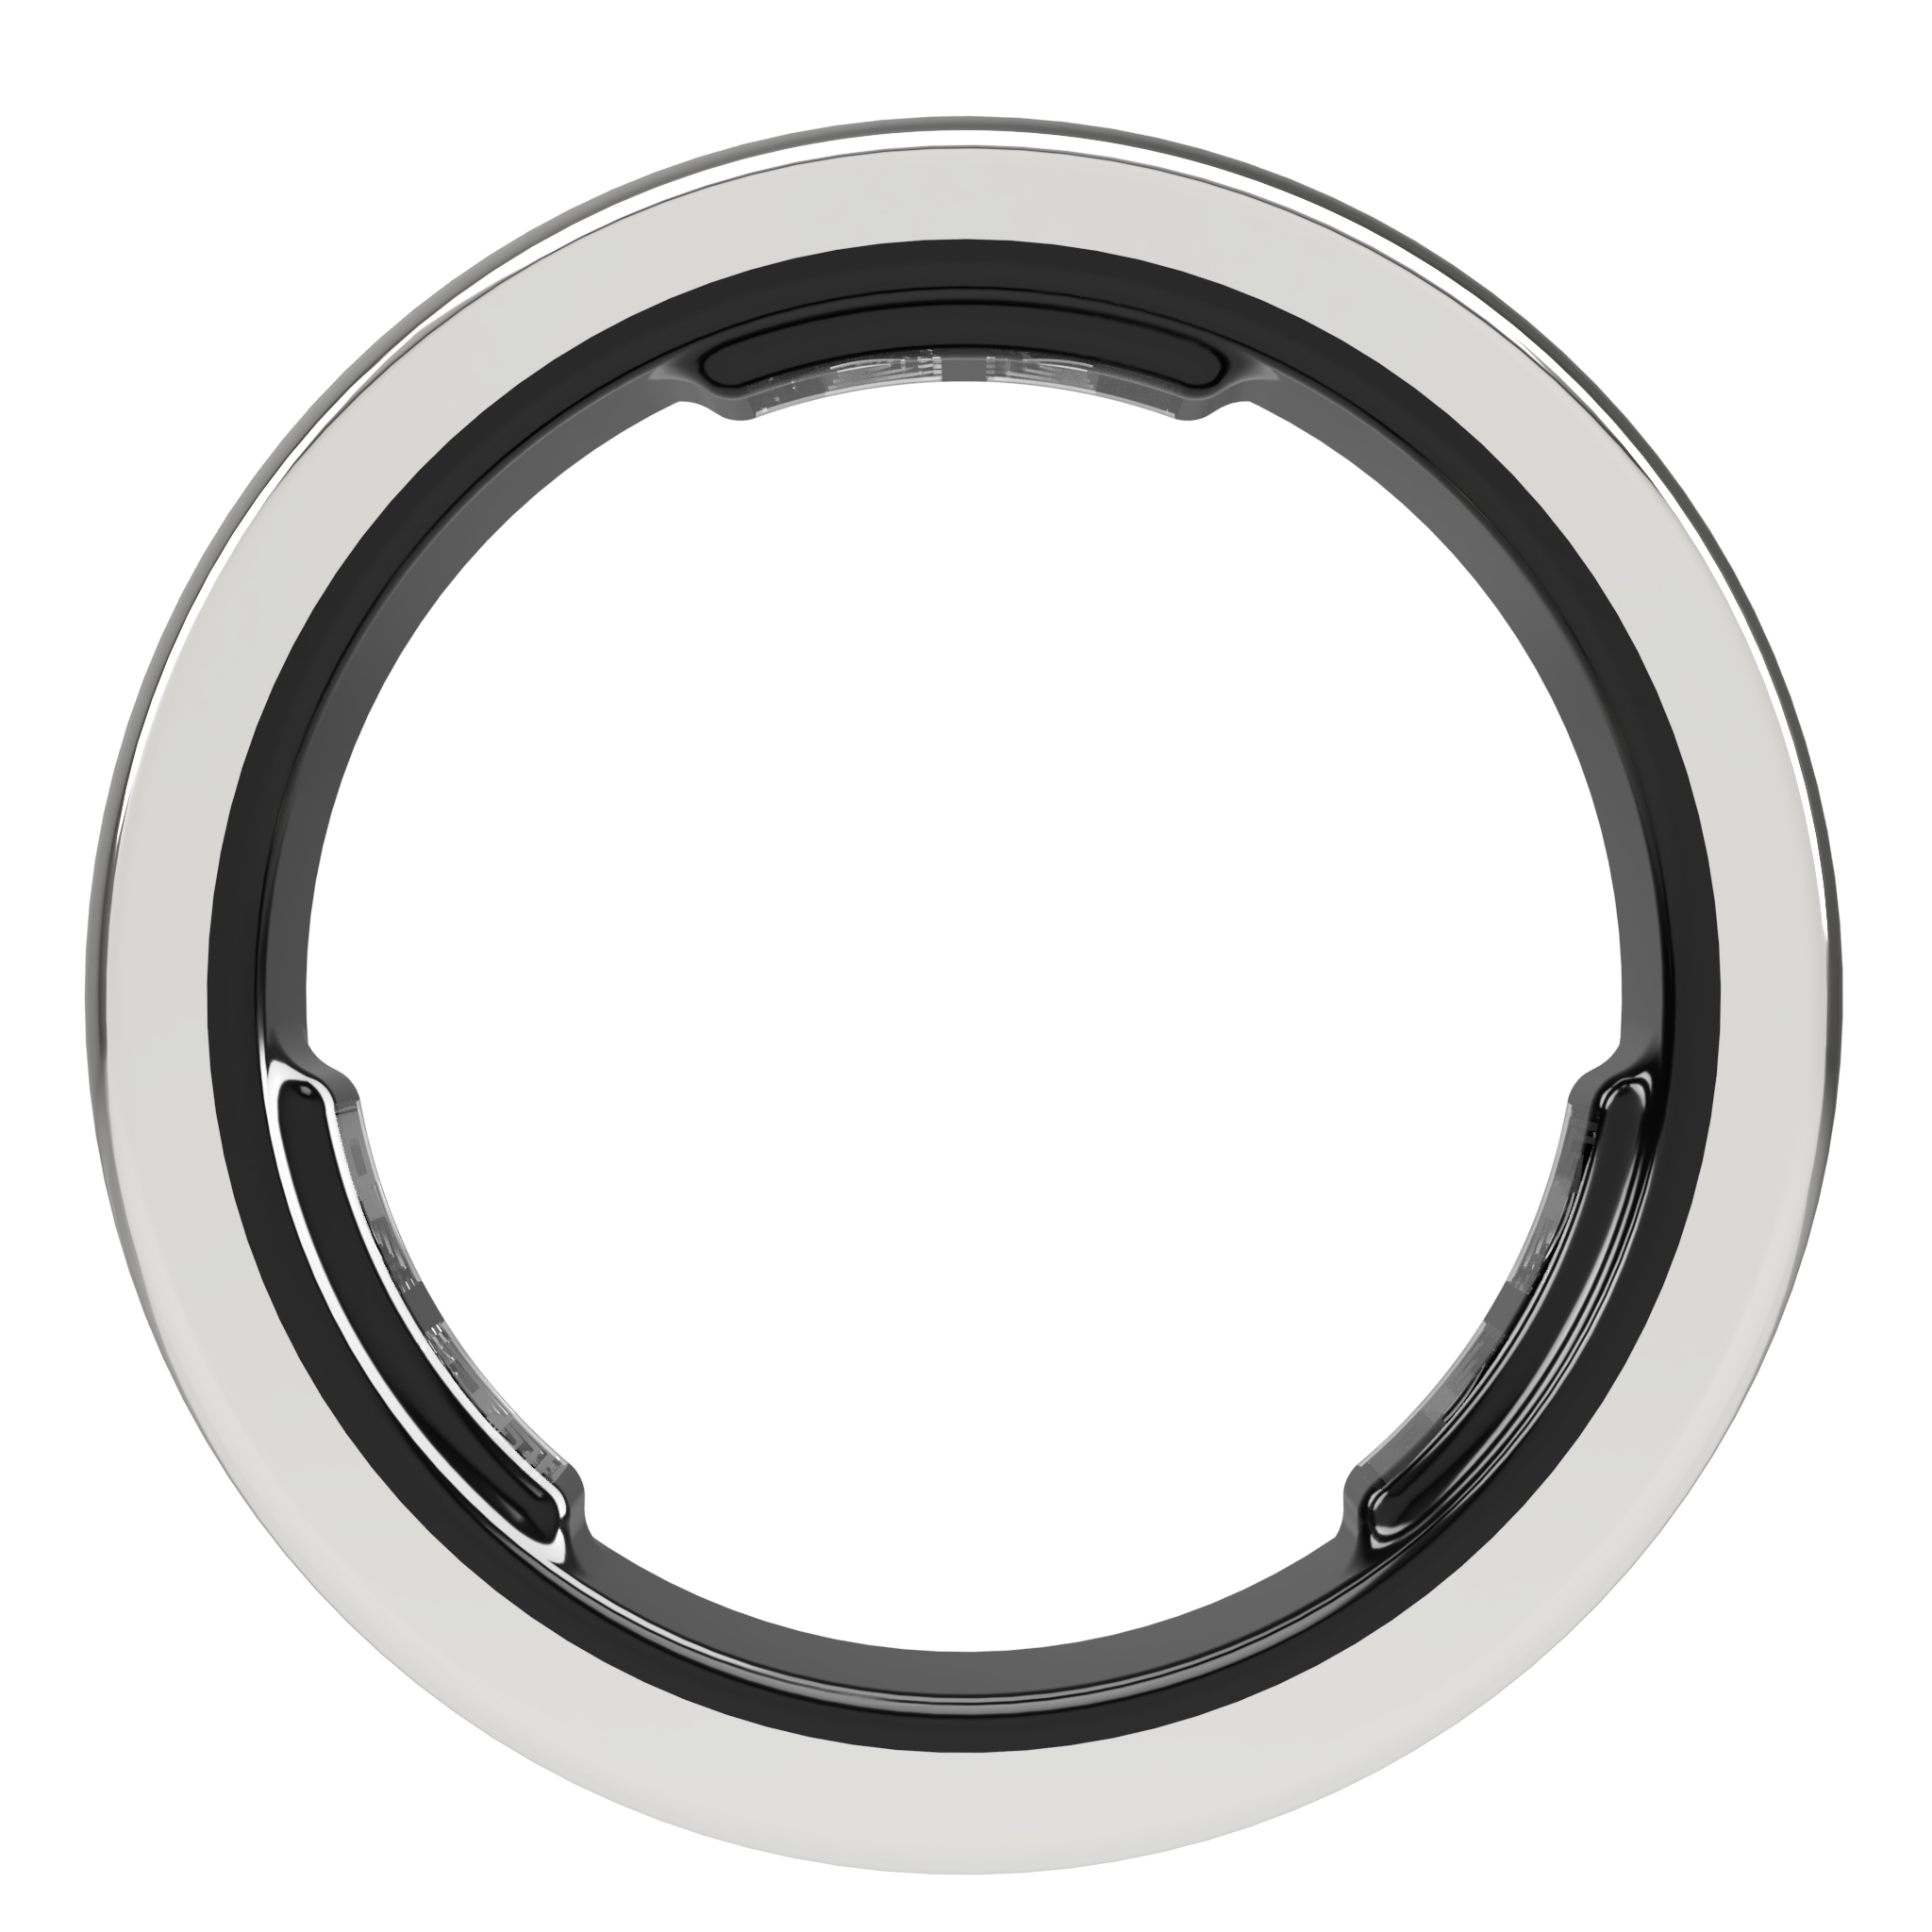 VELIA smart ring in silver version and seen from the side